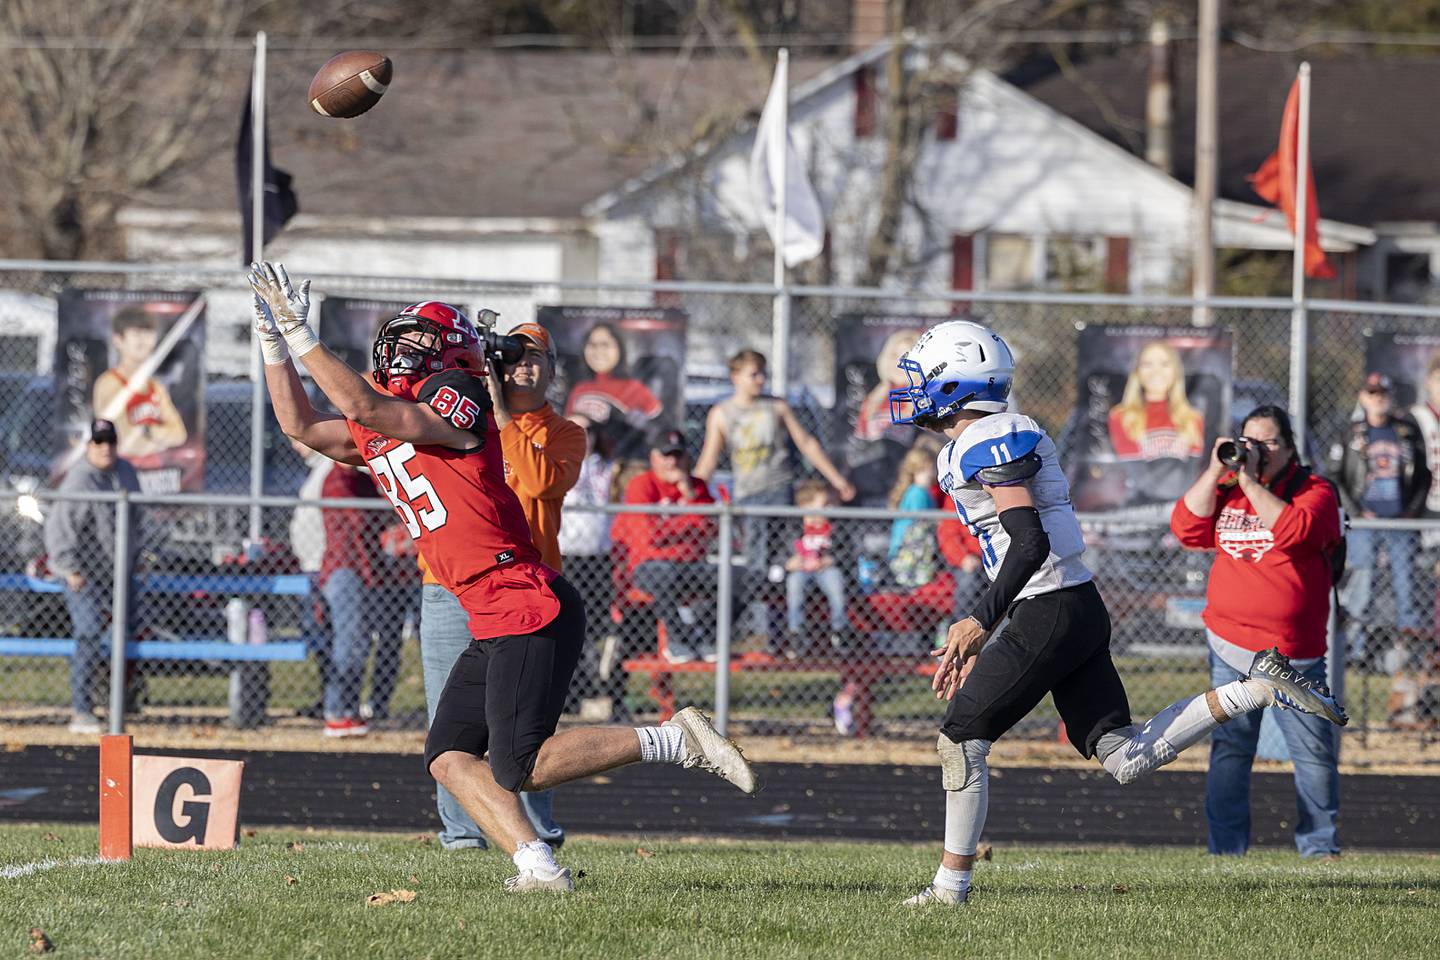 Amboy’s Brennan Blaine hauls in a catch for a touchdown in the second quarter of the Clippers’ first round playoff game Saturday, Oct. 29, 2022 against Blue Ridge.